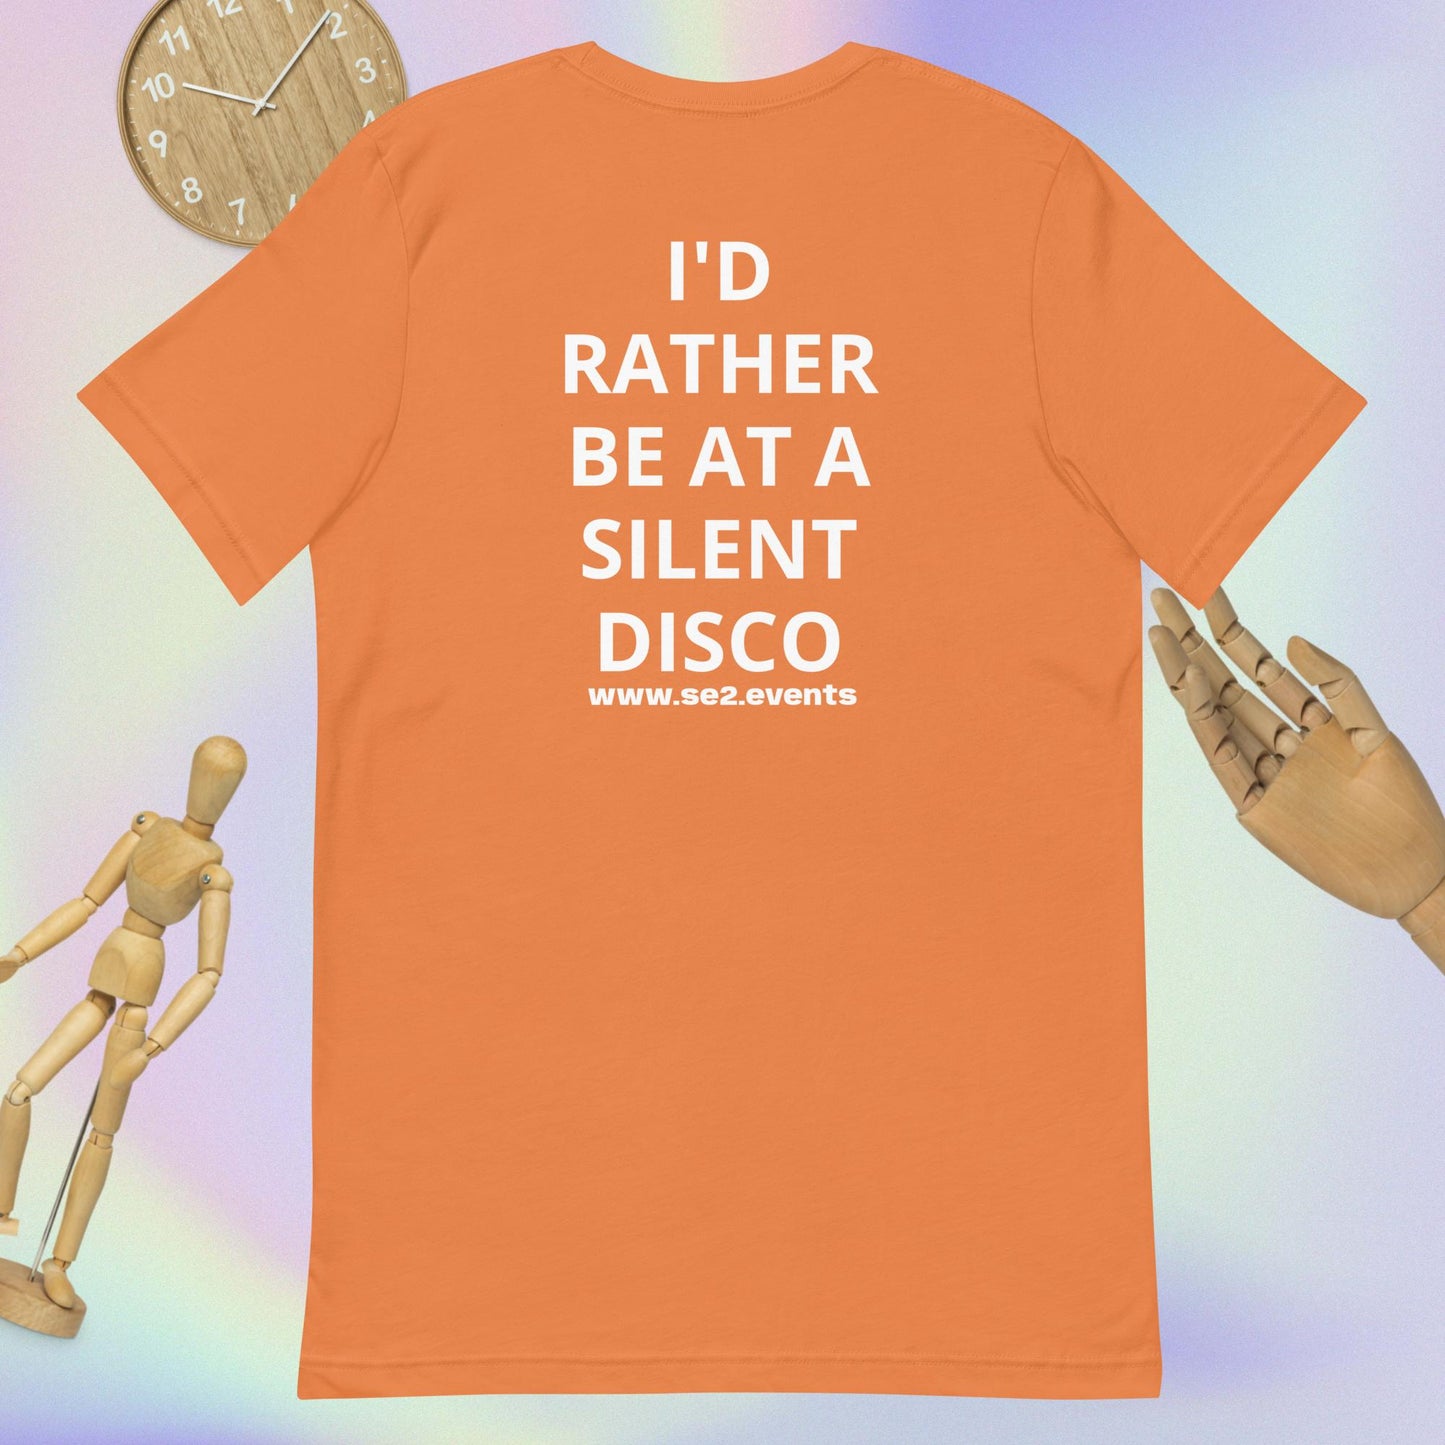 I'd Rather Be At A Silent Disco